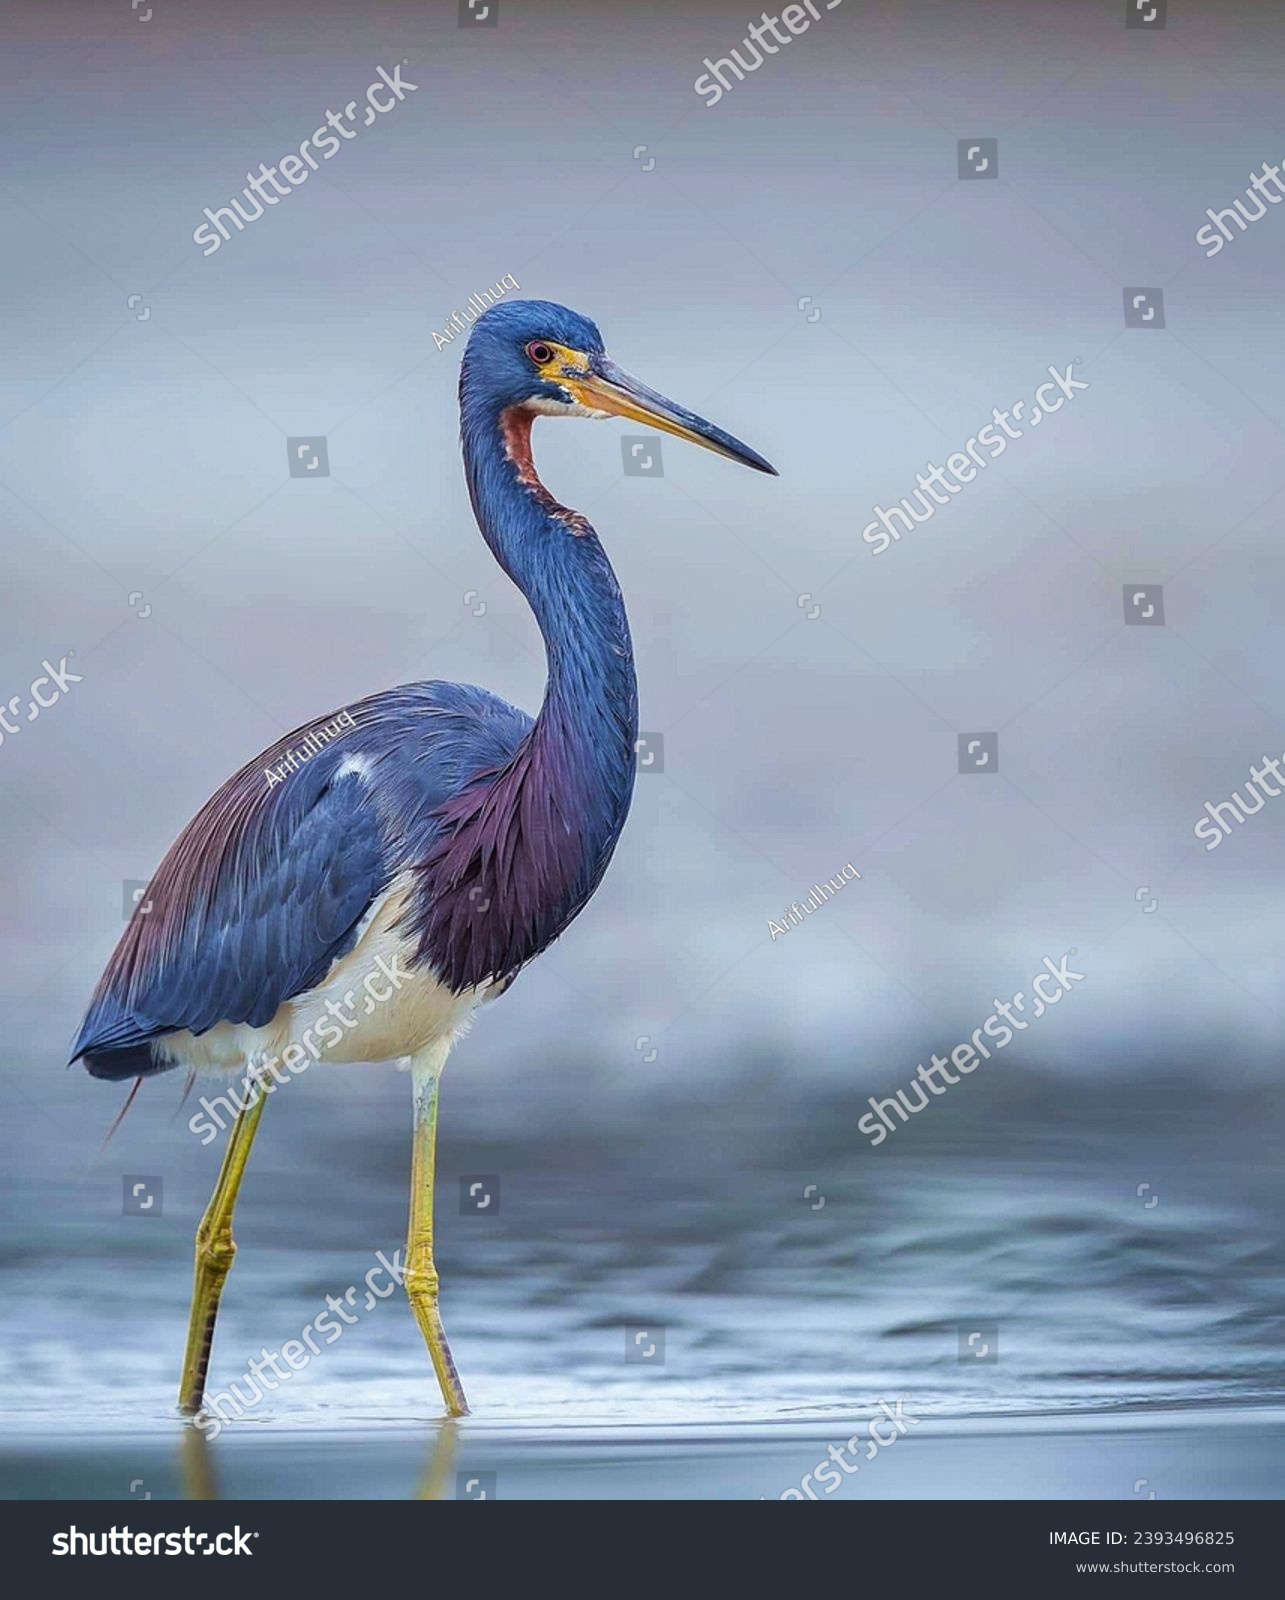 The tricolored heron , formerly known as the Louisiana heron, is a small species of heron native to coastal parts of the Americas.  #2393496825